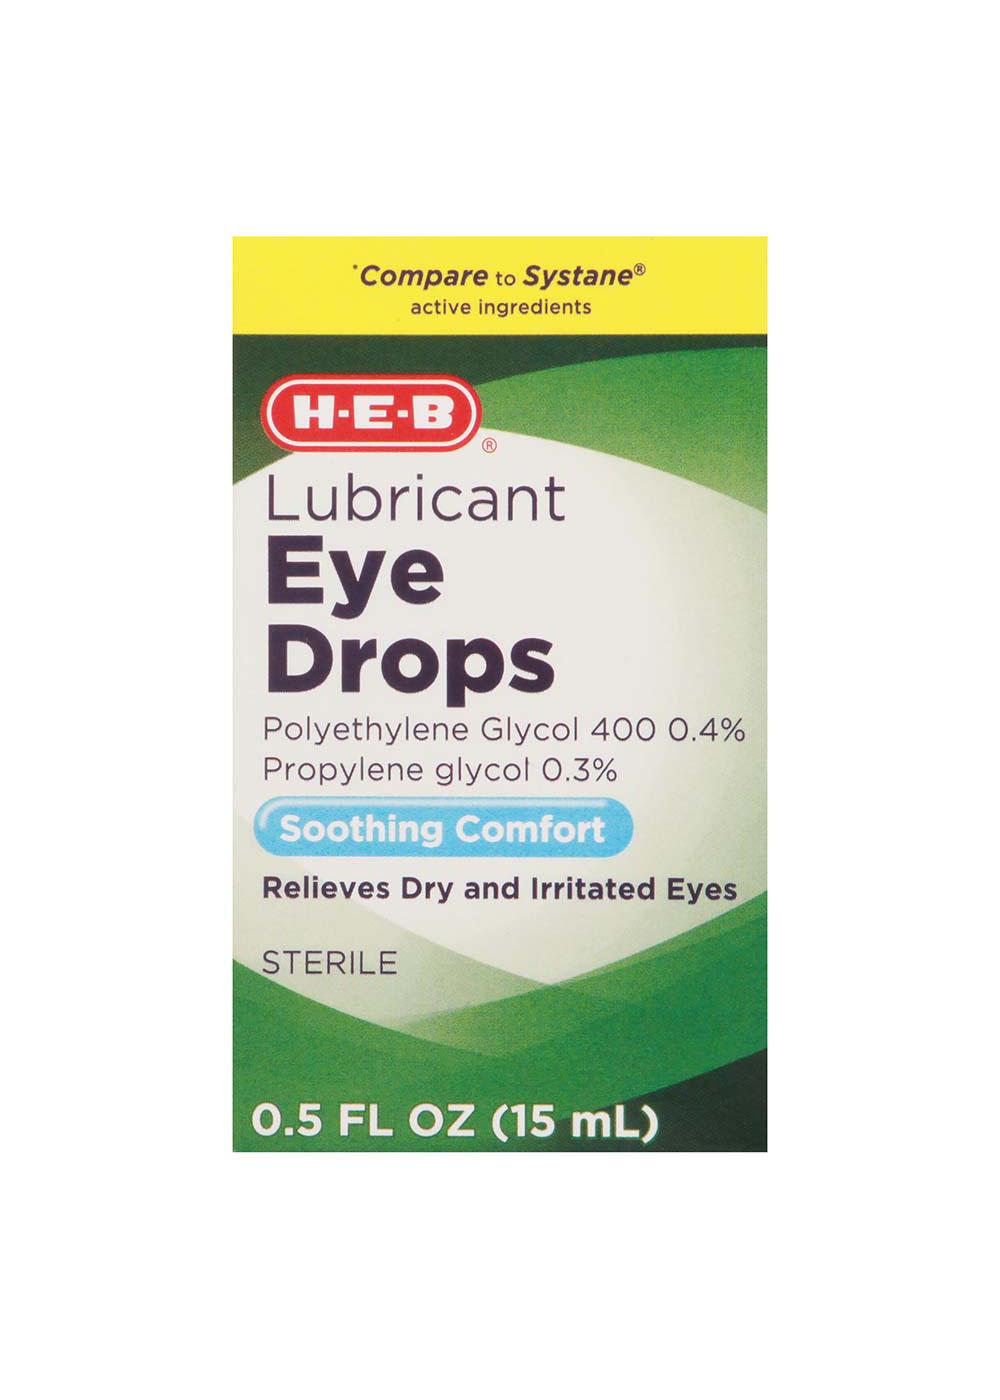 H-E-B Lubricant Eye Drops Soothing Comfort